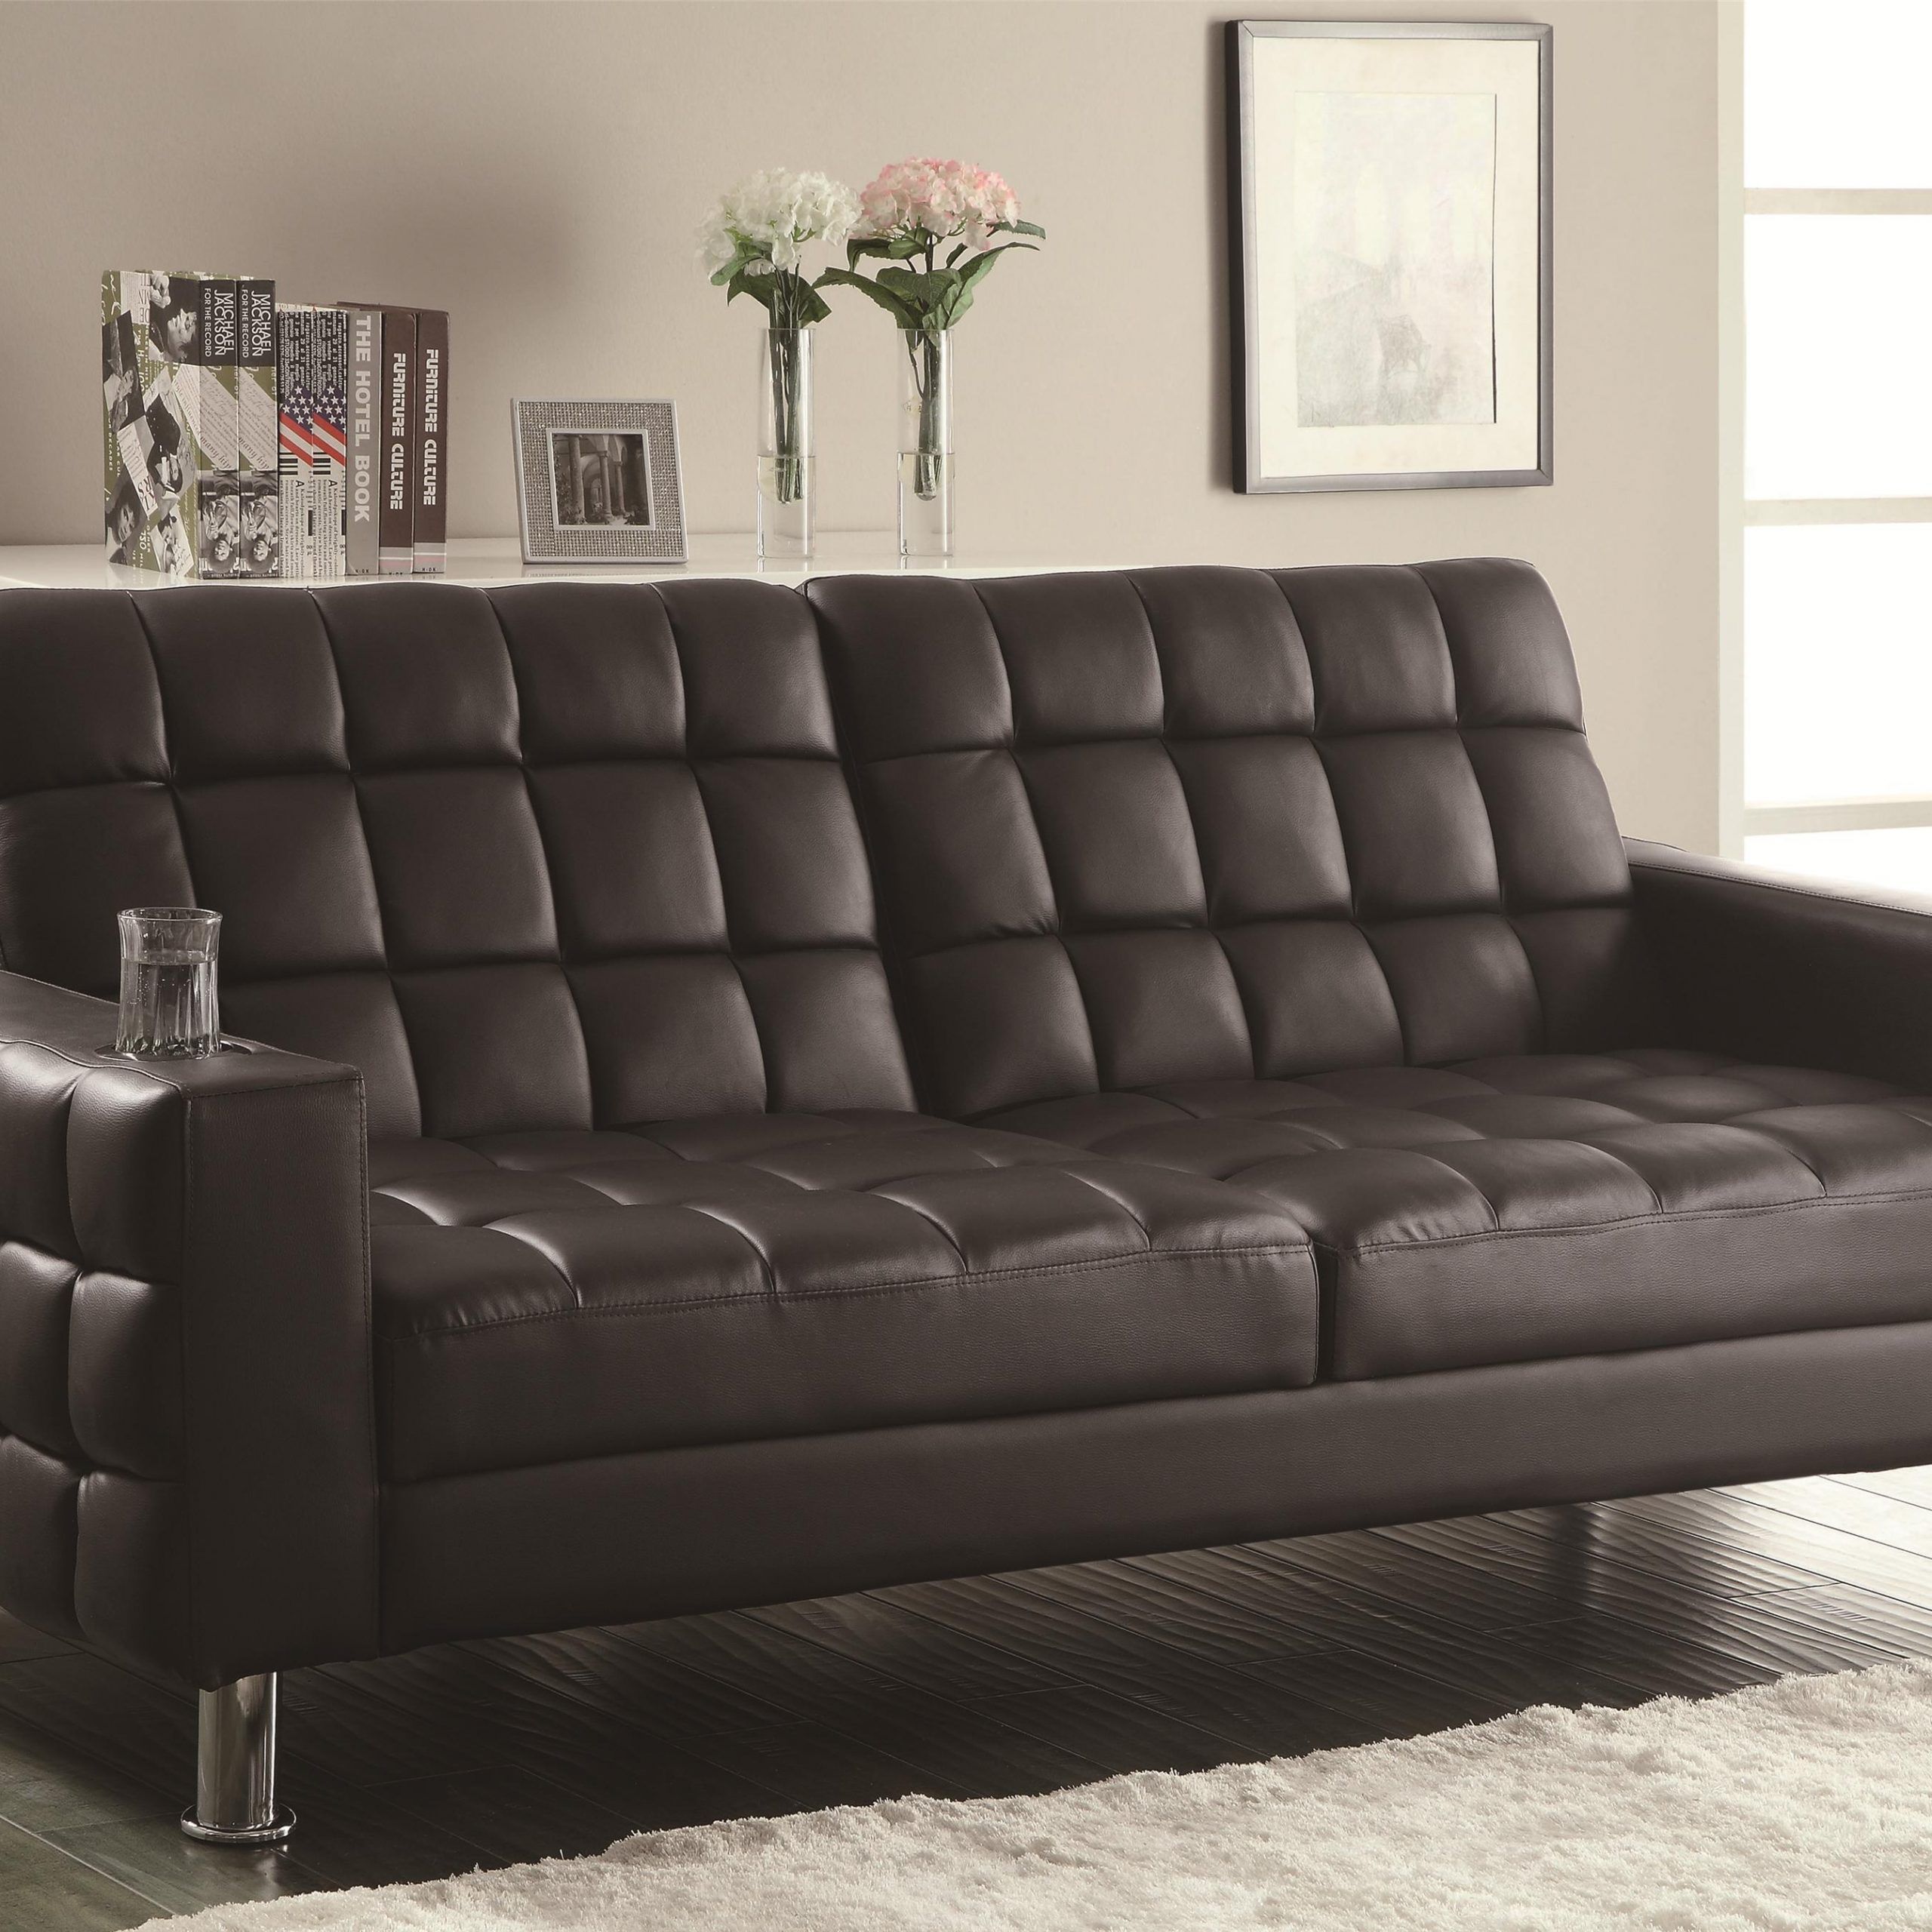 Coaster Sofa Beds And Futons Adjustable Sofa Bed With Cup Inside Prato Storage Sectional Futon Sofas (View 11 of 15)